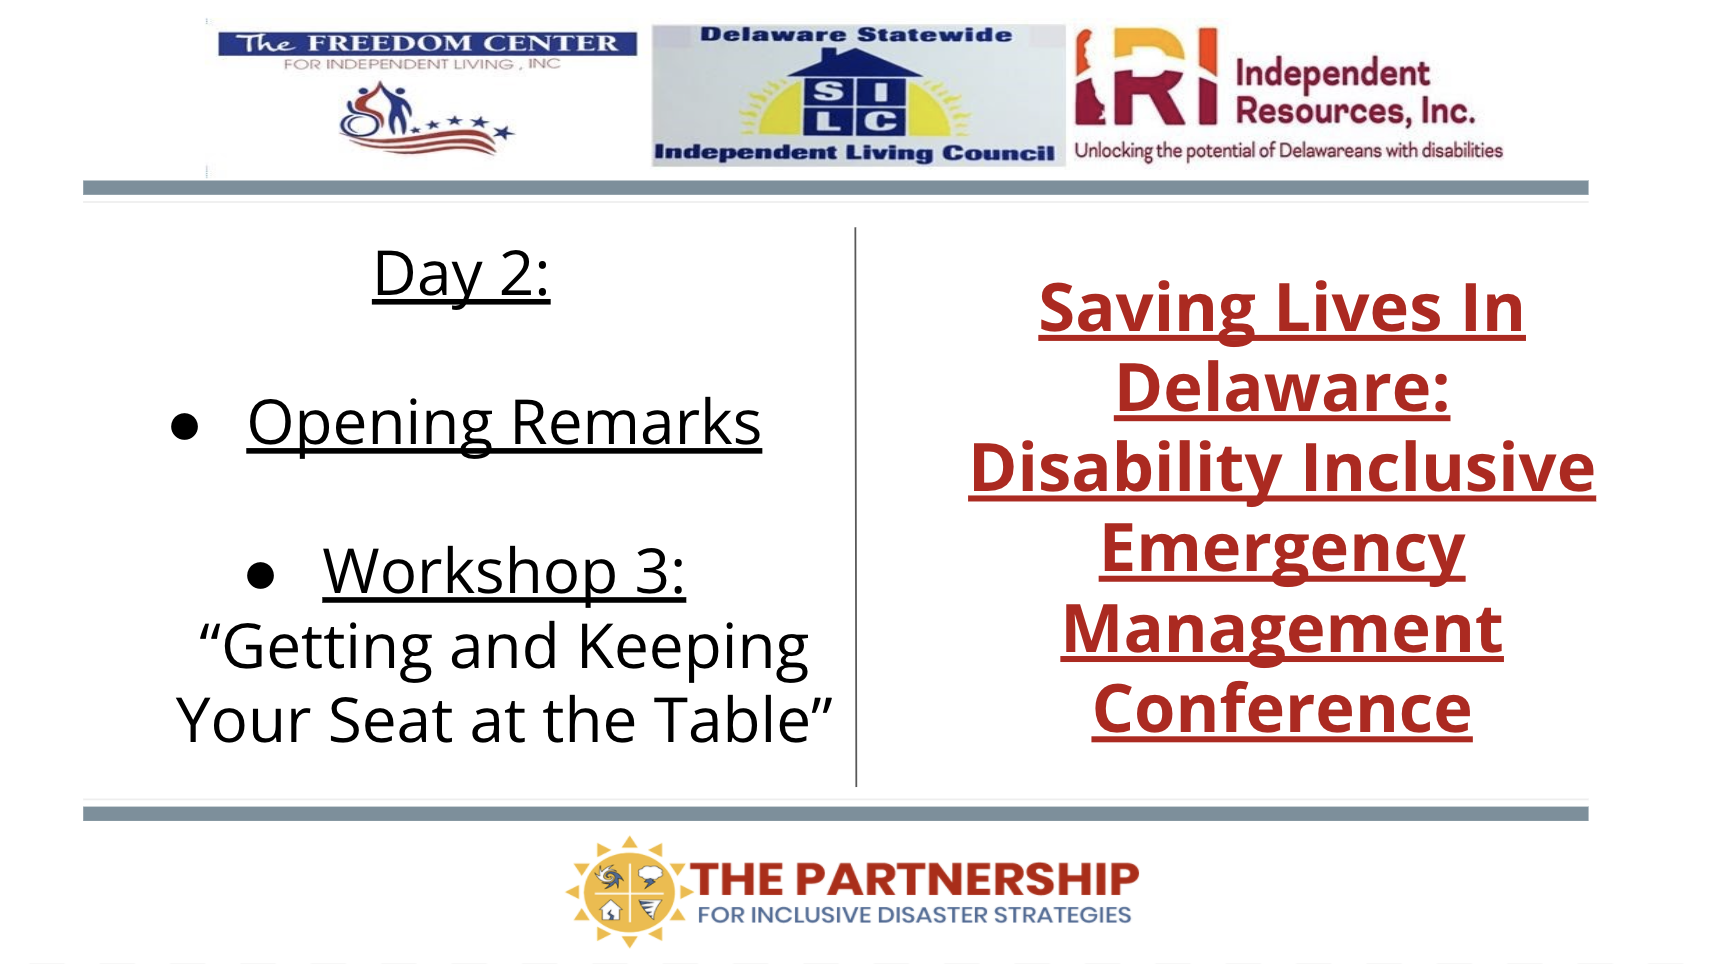 Image with the logos of The Partnership, FCIL, DE SILC, and IRI. Text reads "Day 2. Opening Remarks. Workshop 3, “Getting and Keeping Your Seat at the Table”